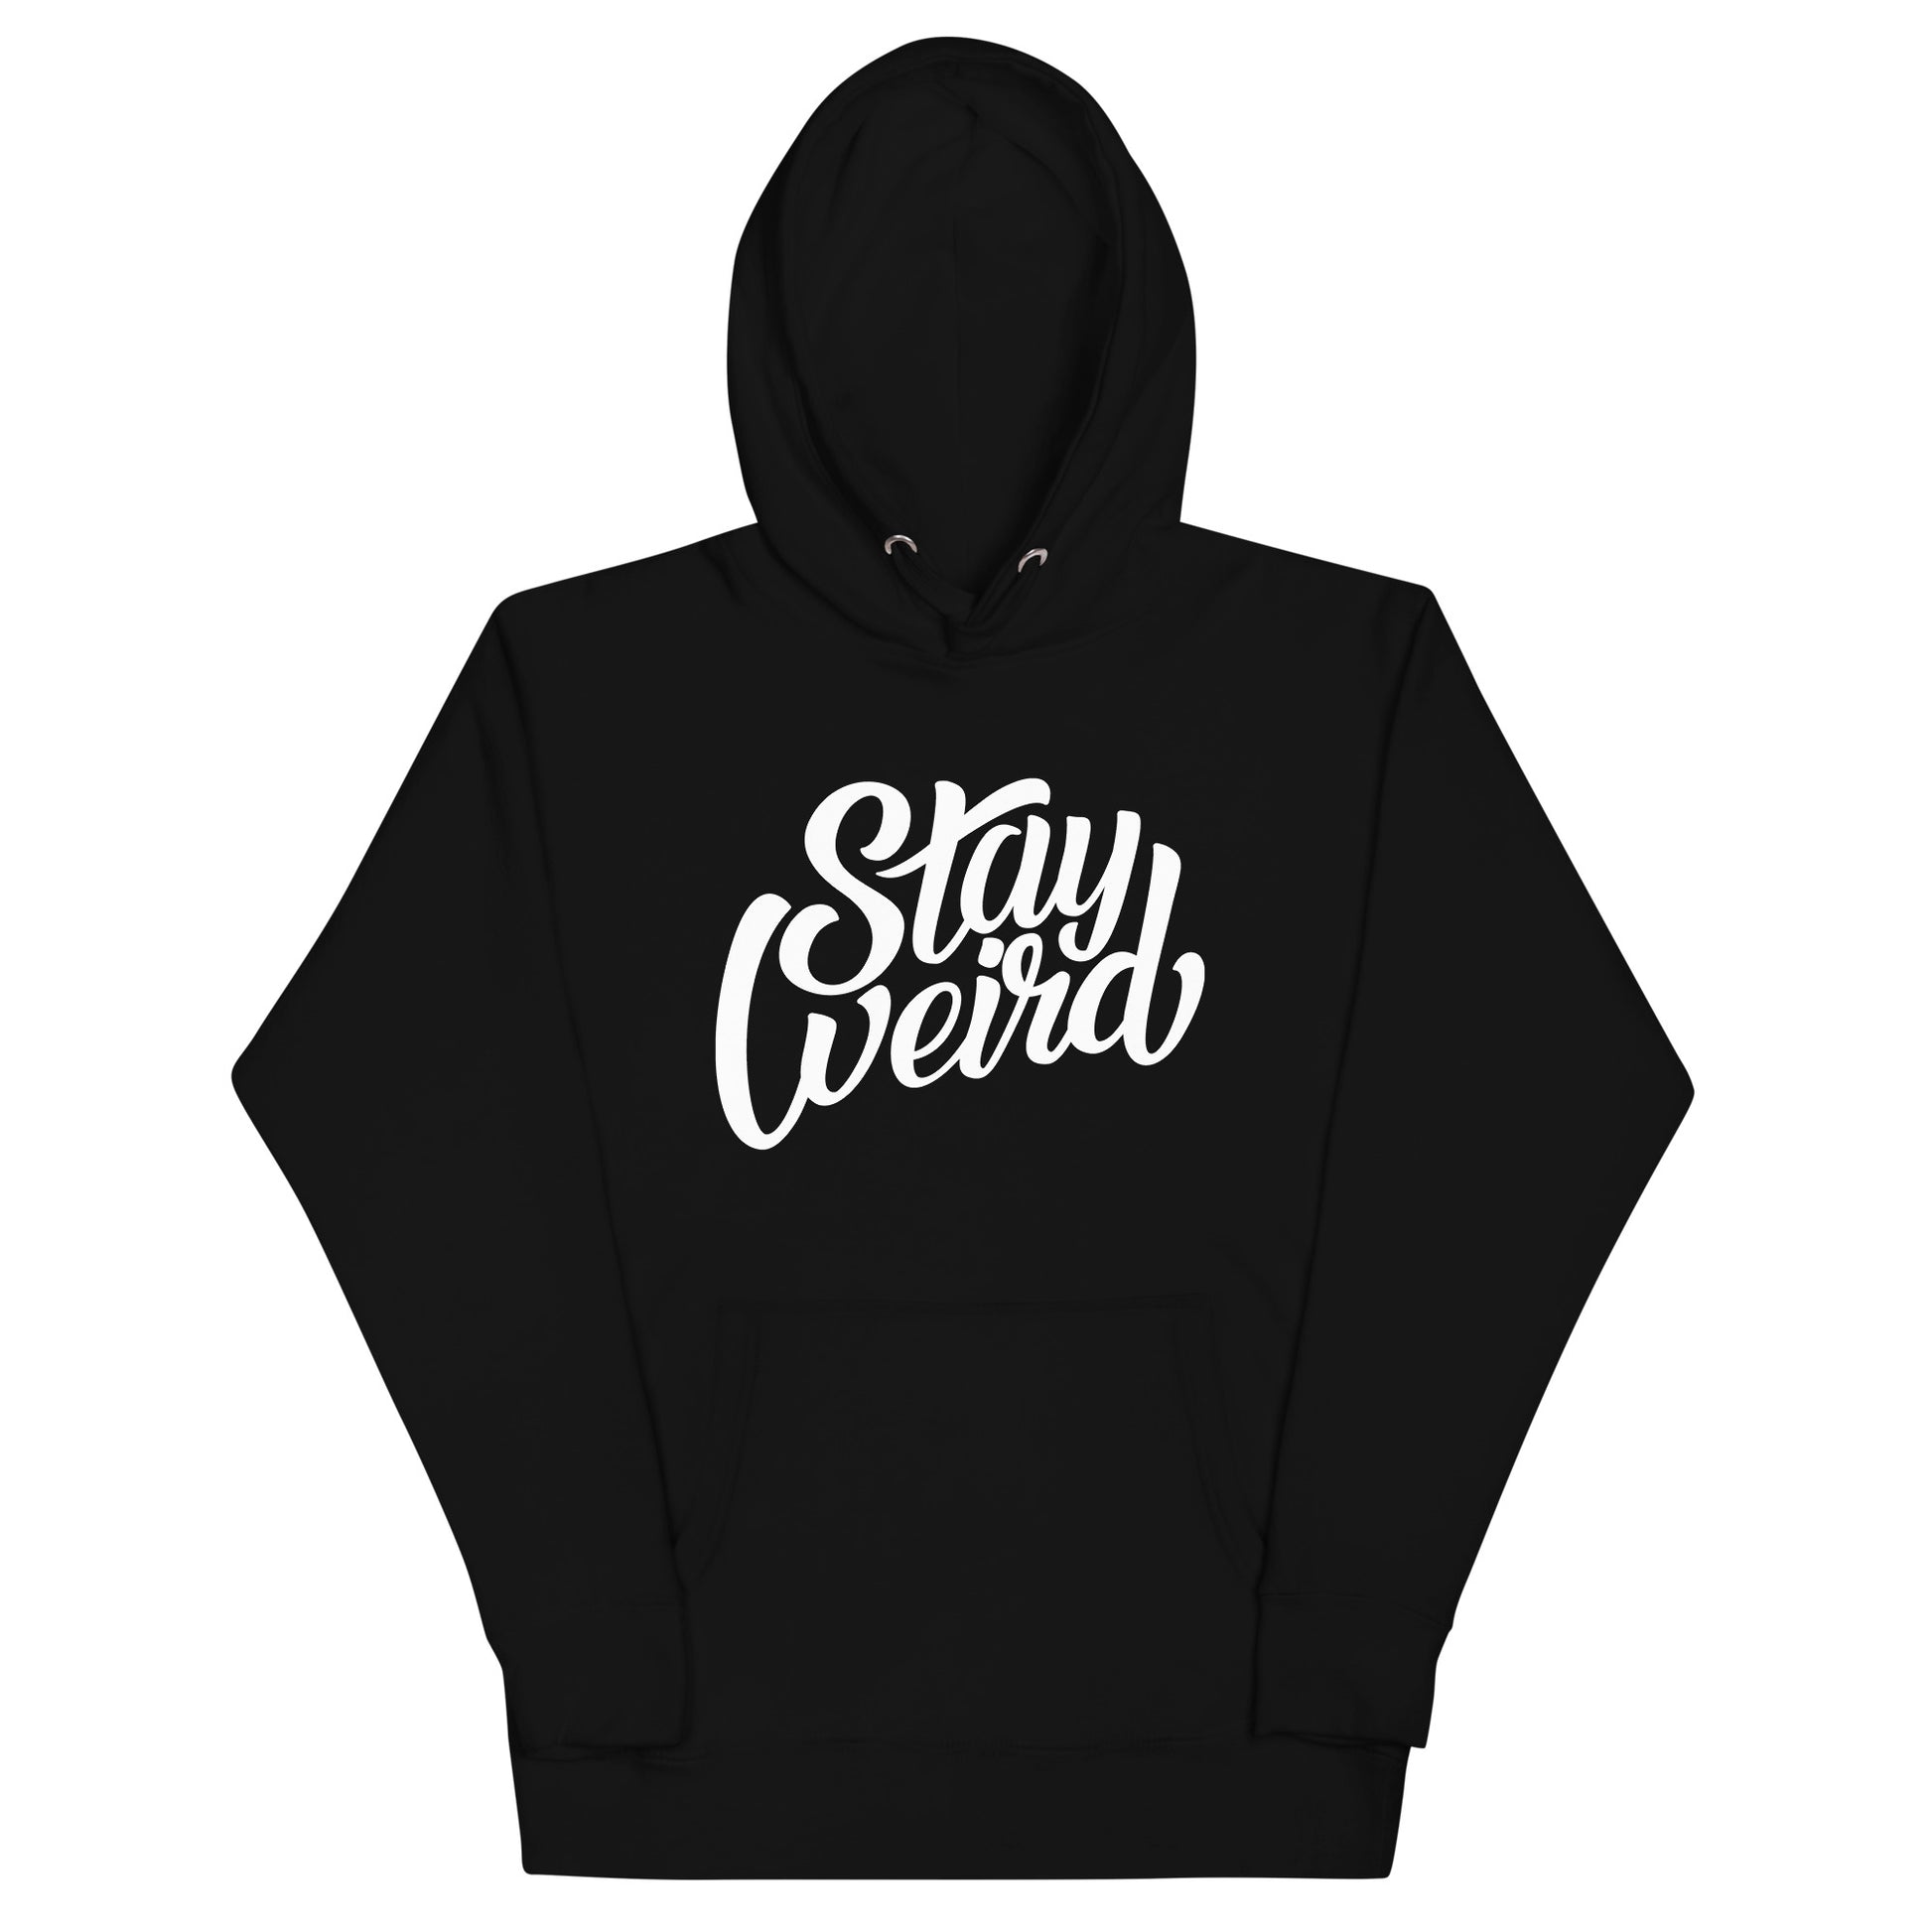 hoodie Stay Weird black by B.Different Clothing independent streetwear brand inspired by street art graffiti